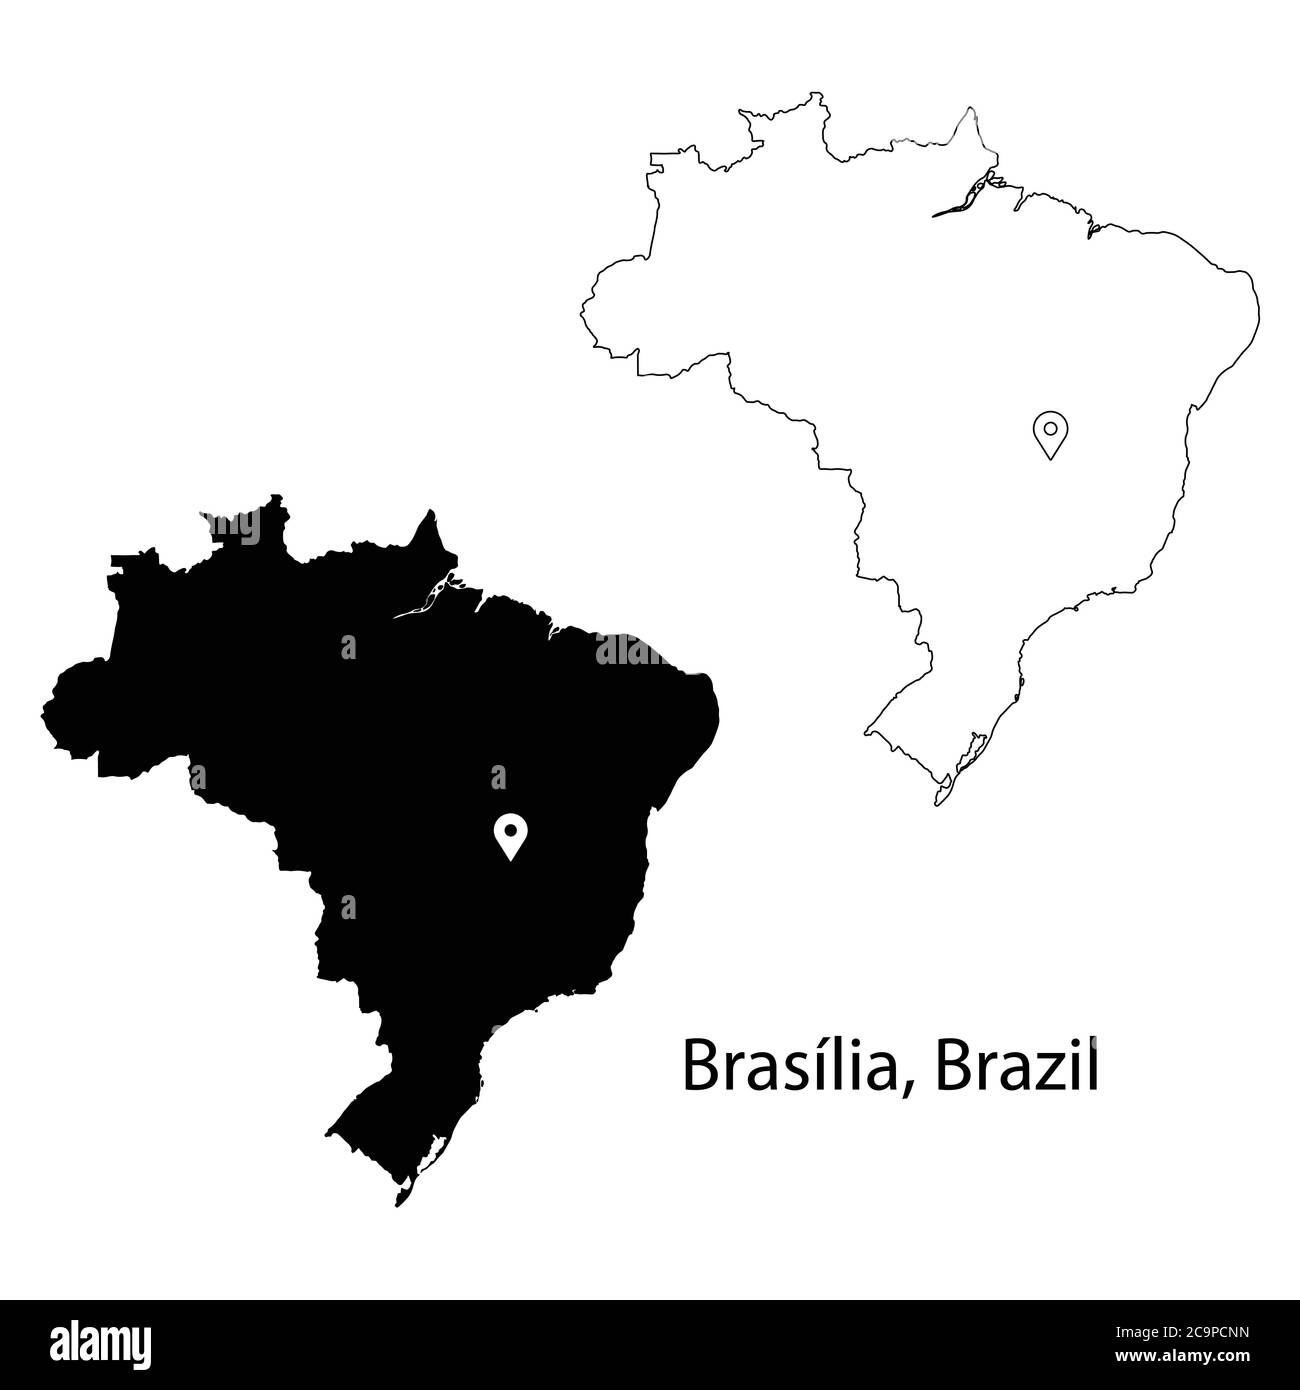 Brasilia Brazil. Detailed Country Map with Location Pin on Capital City. Black silhouette and outline maps isolated on white background. EPS Vector Stock Vector